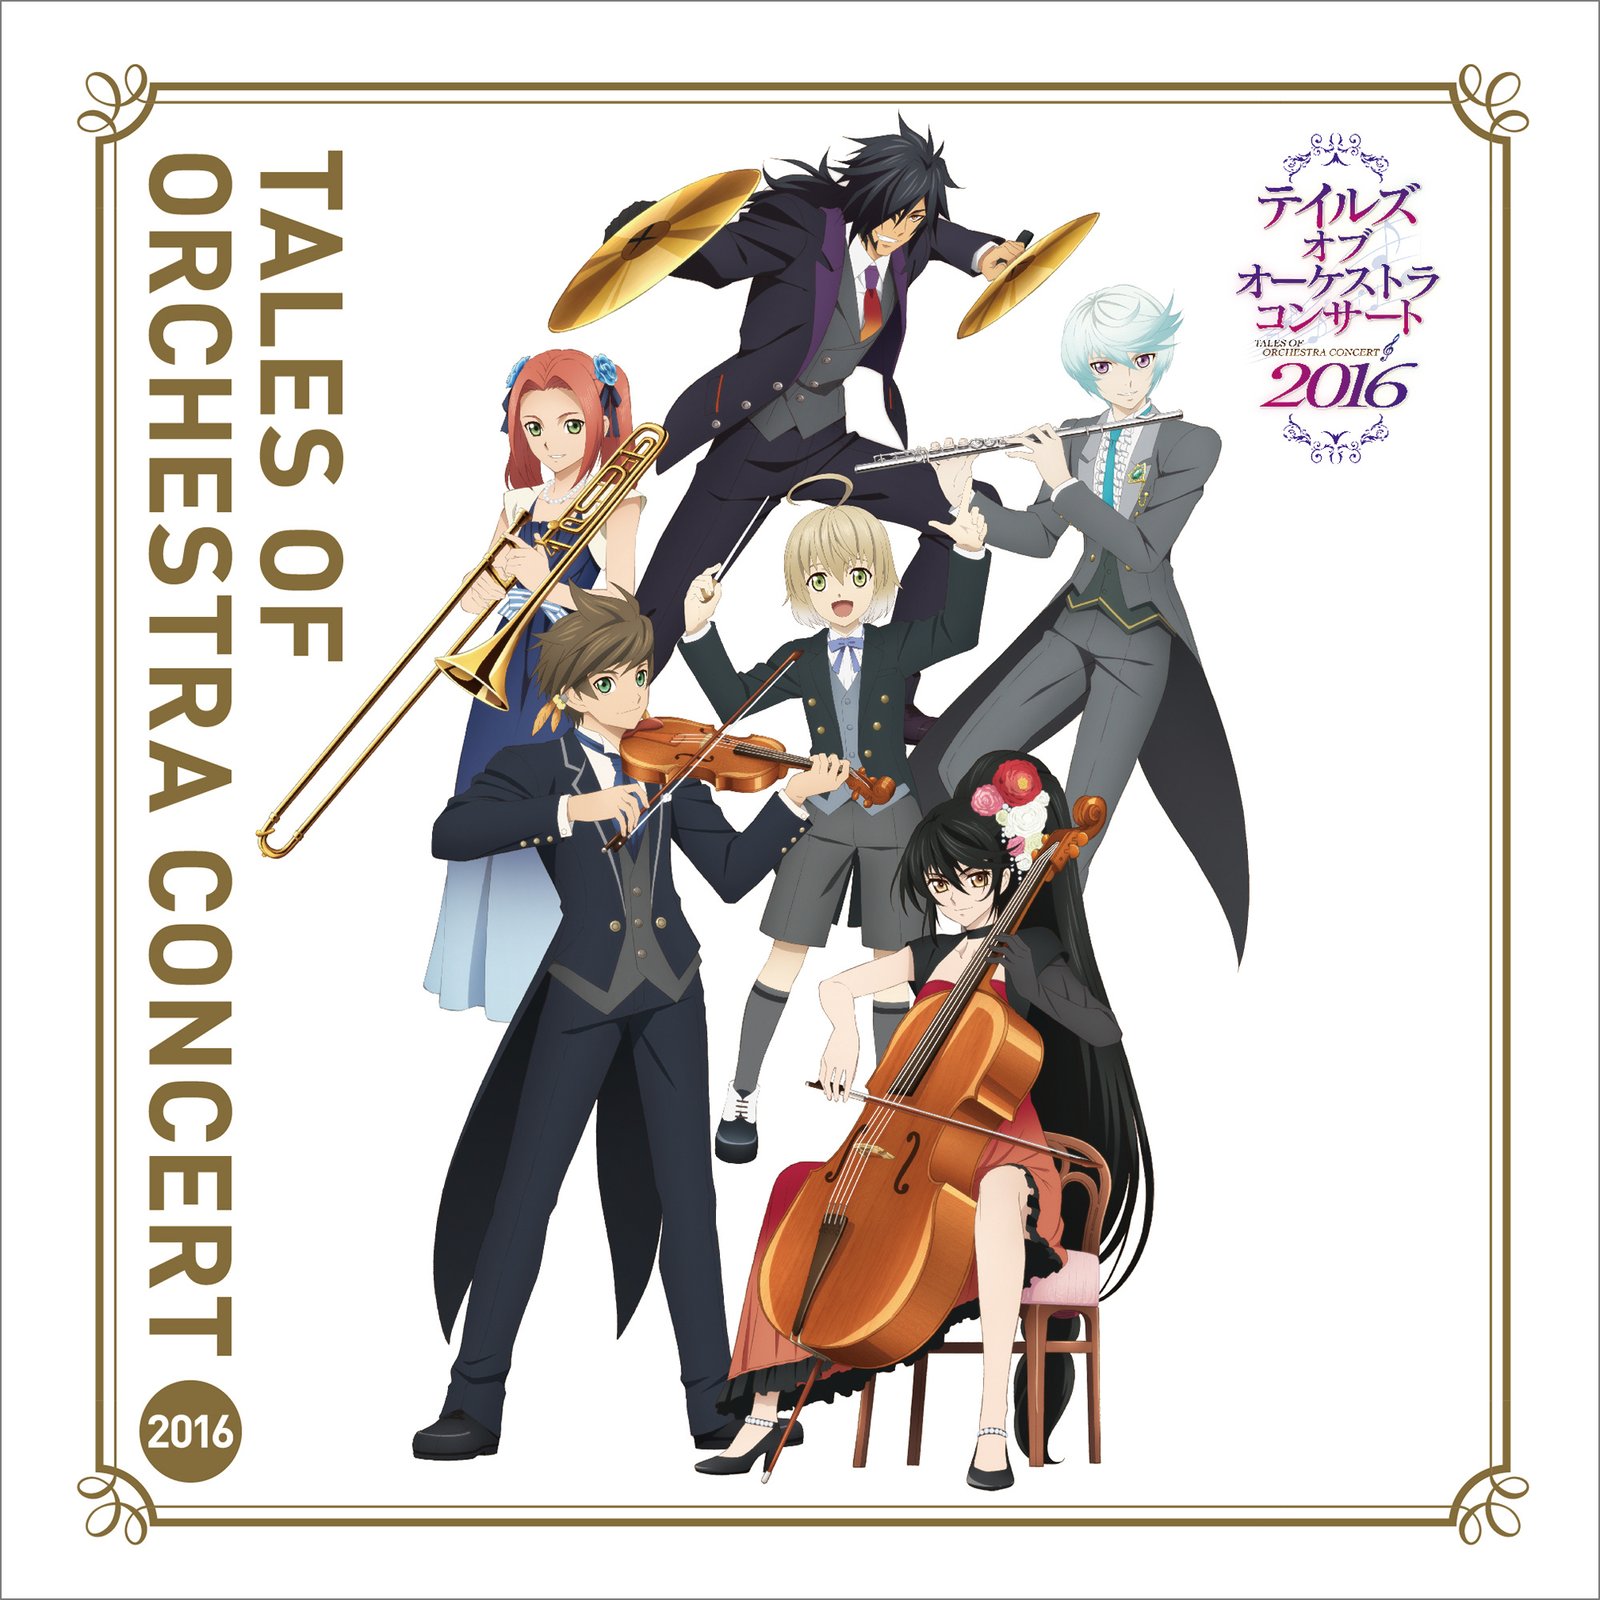 Track List, CD Jacket Revealed for Tales of Orchestra 2016 | Music News |  TOM Shop: Figures & Merch From Japan